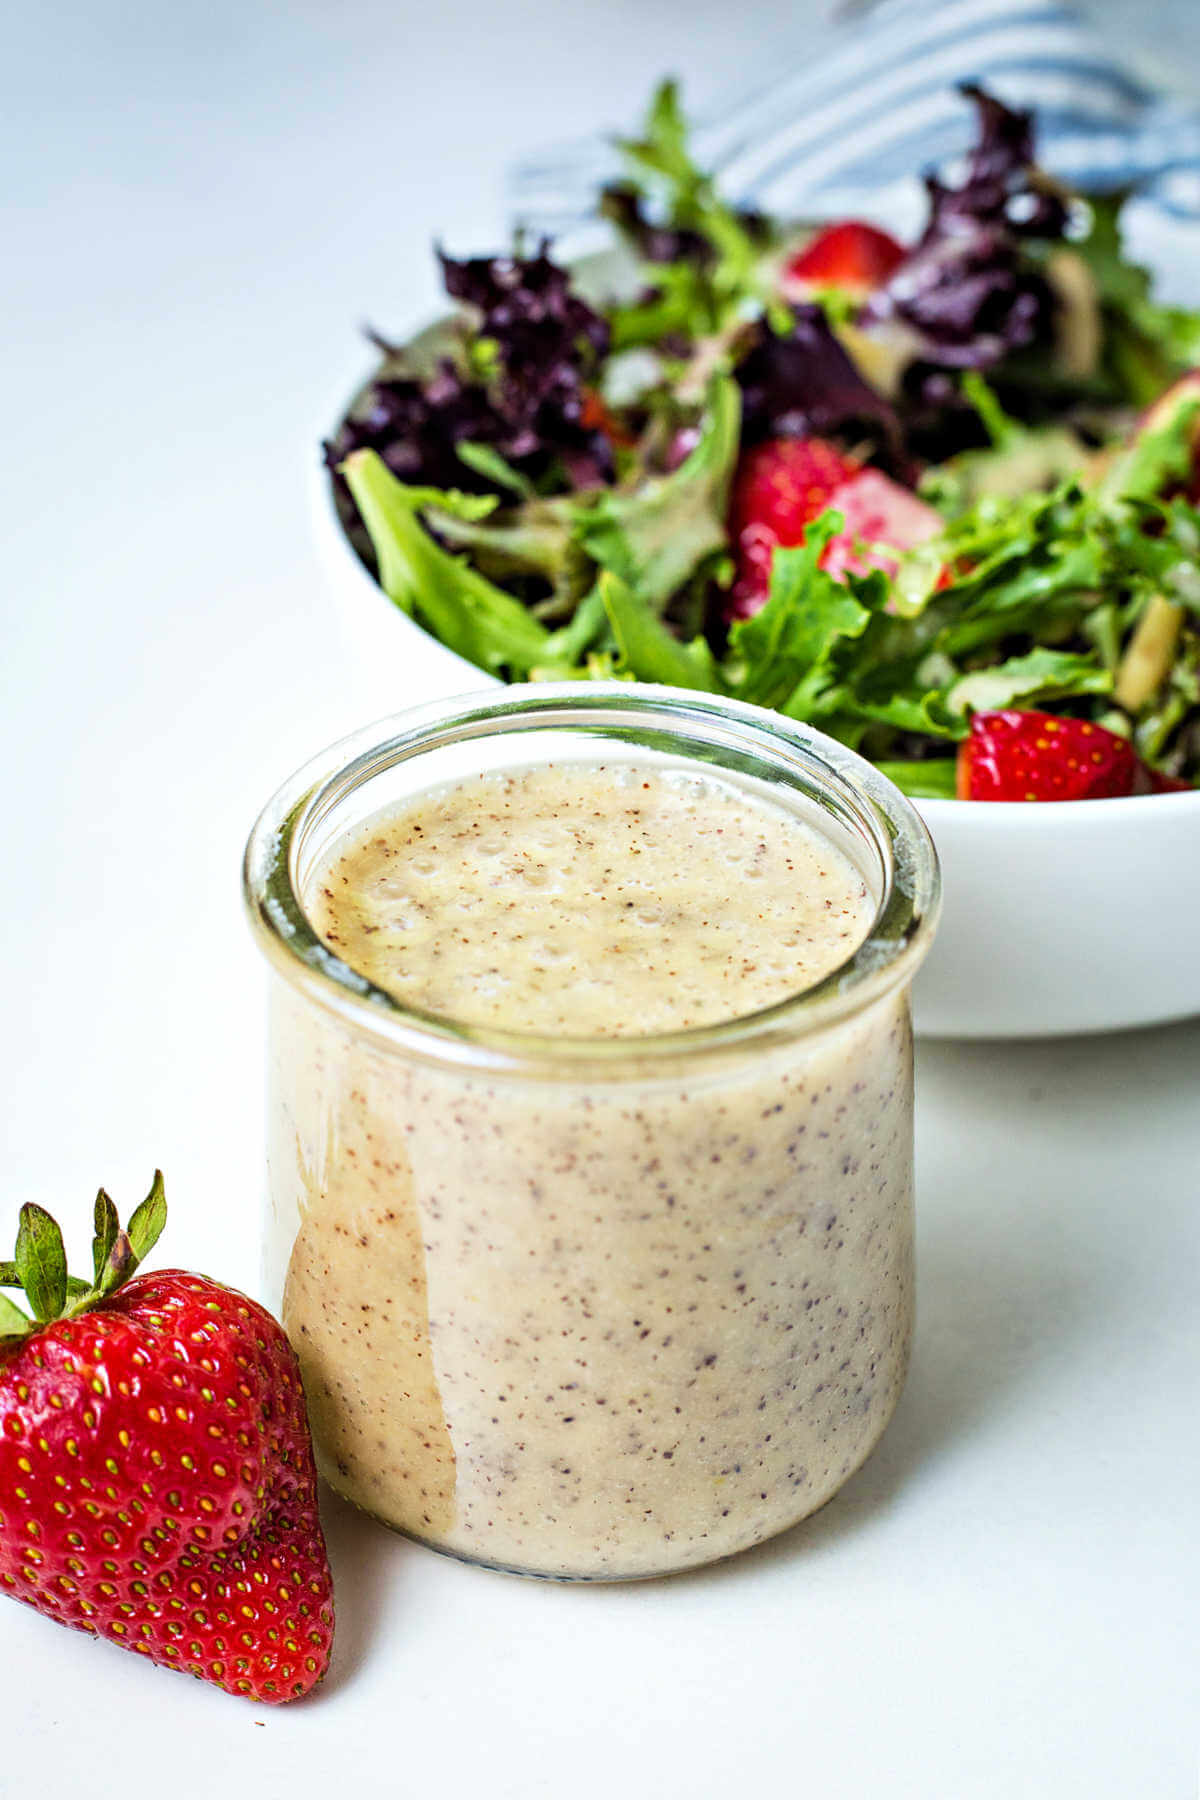 poppy seed dressing in a small glass jar sitting on a table in front of a bowl of salad.